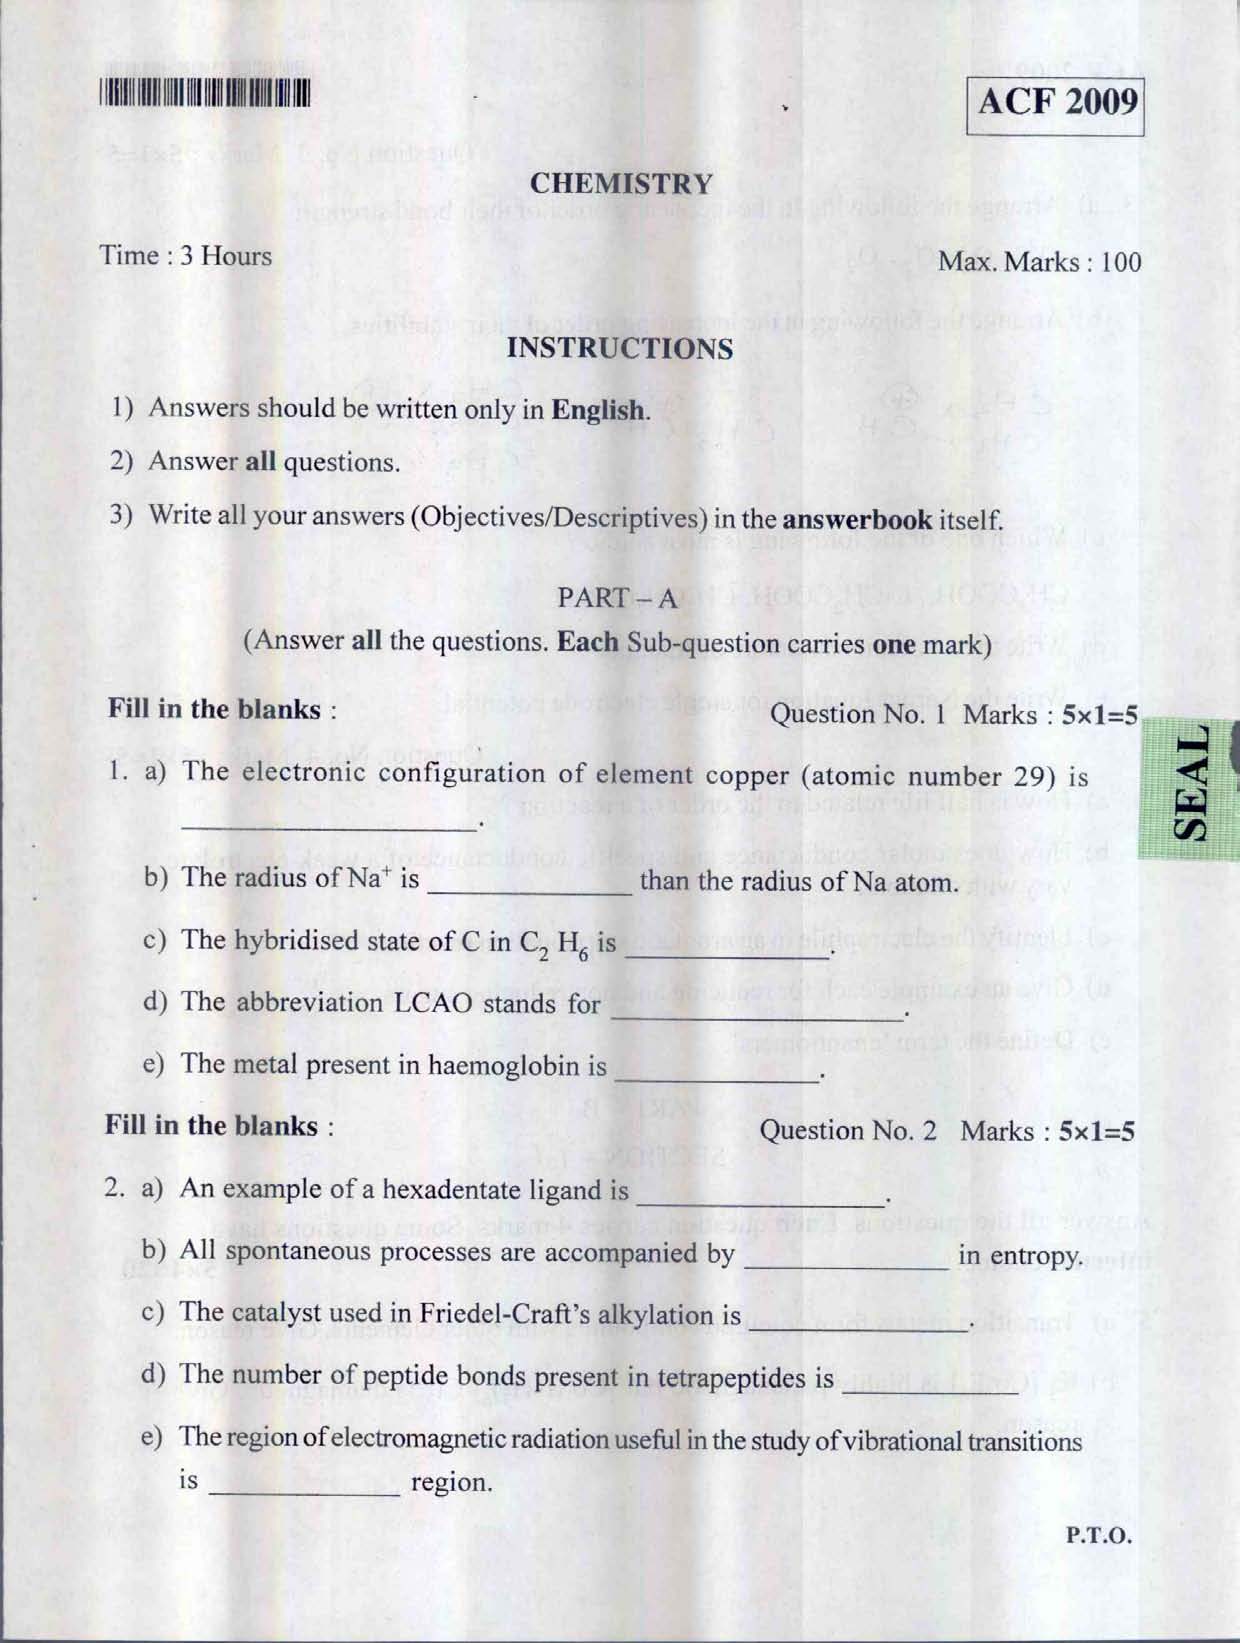 Karnataka PSC Assistant Conservator Of Forests Exam Code ACF 2009 31